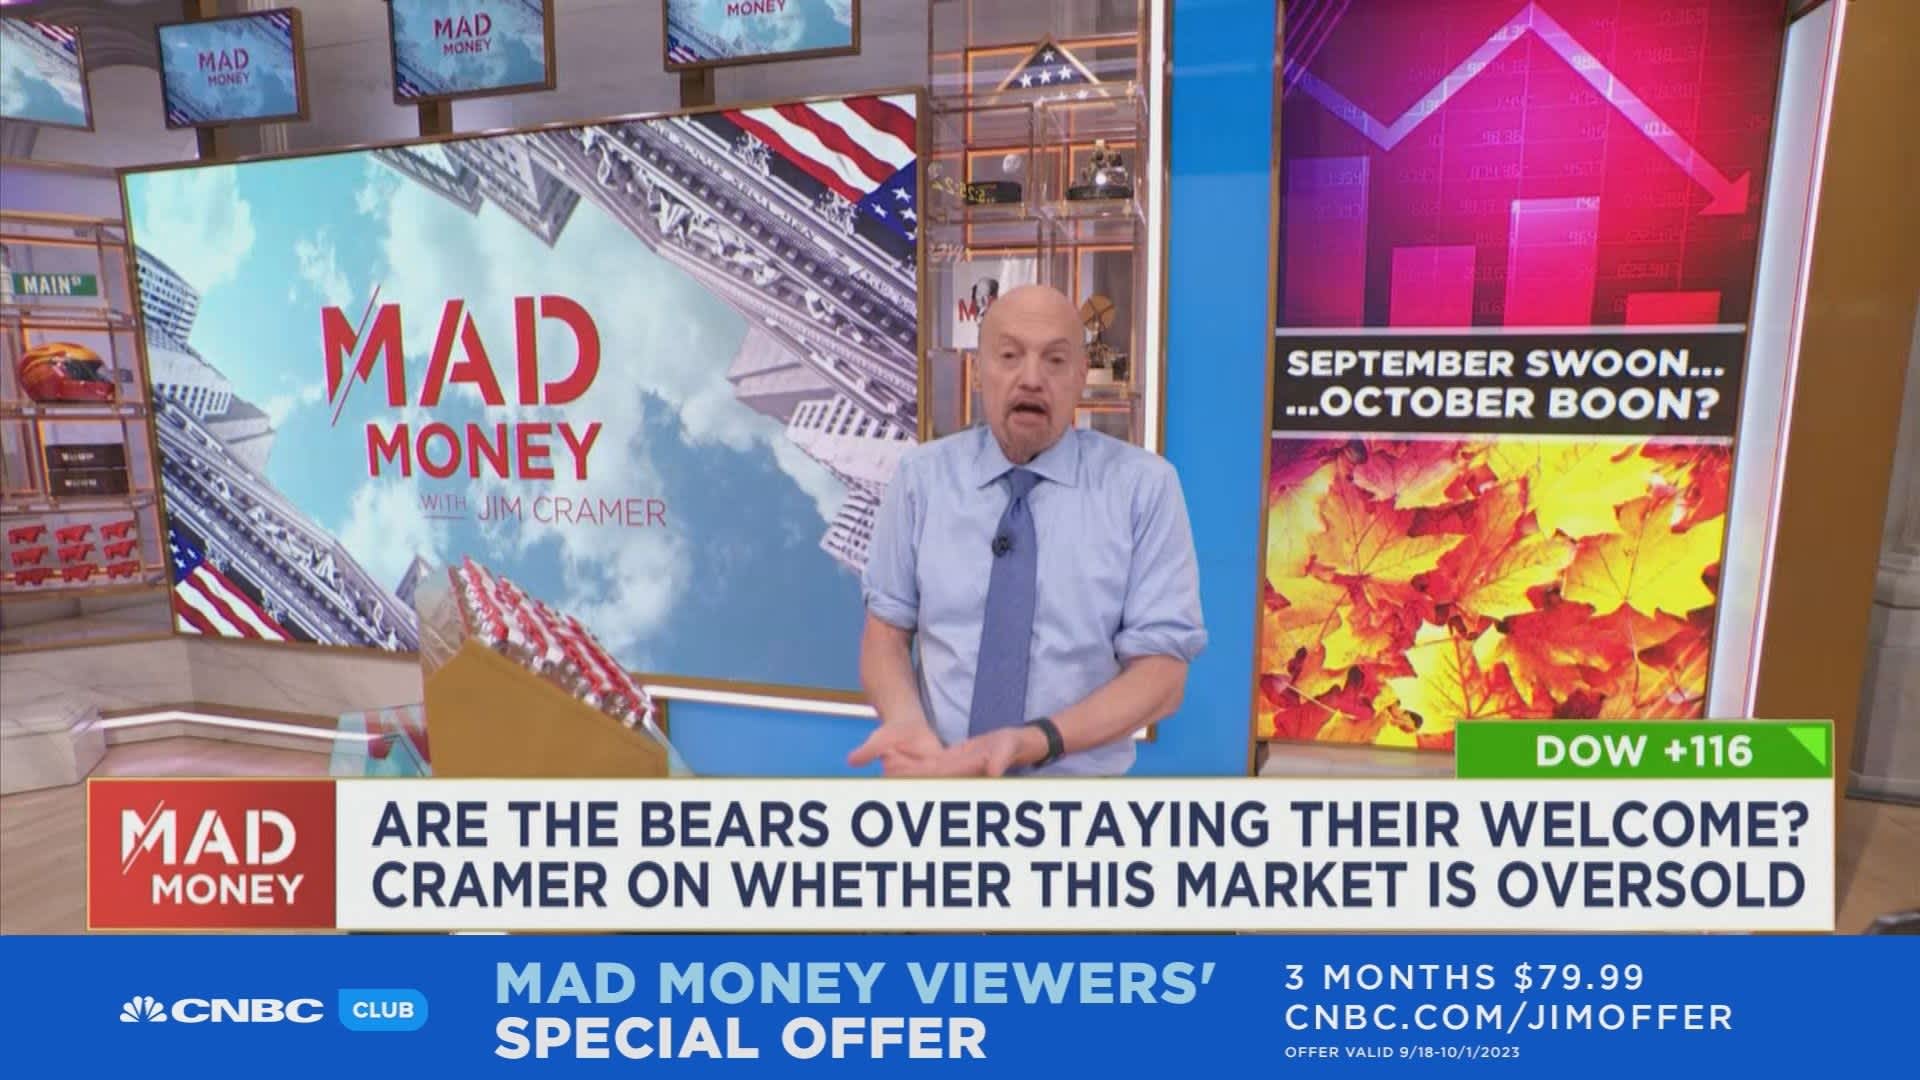 Bears beware of an oversold market, it might be a sign you overstayed your welcome, says Jim Cramer